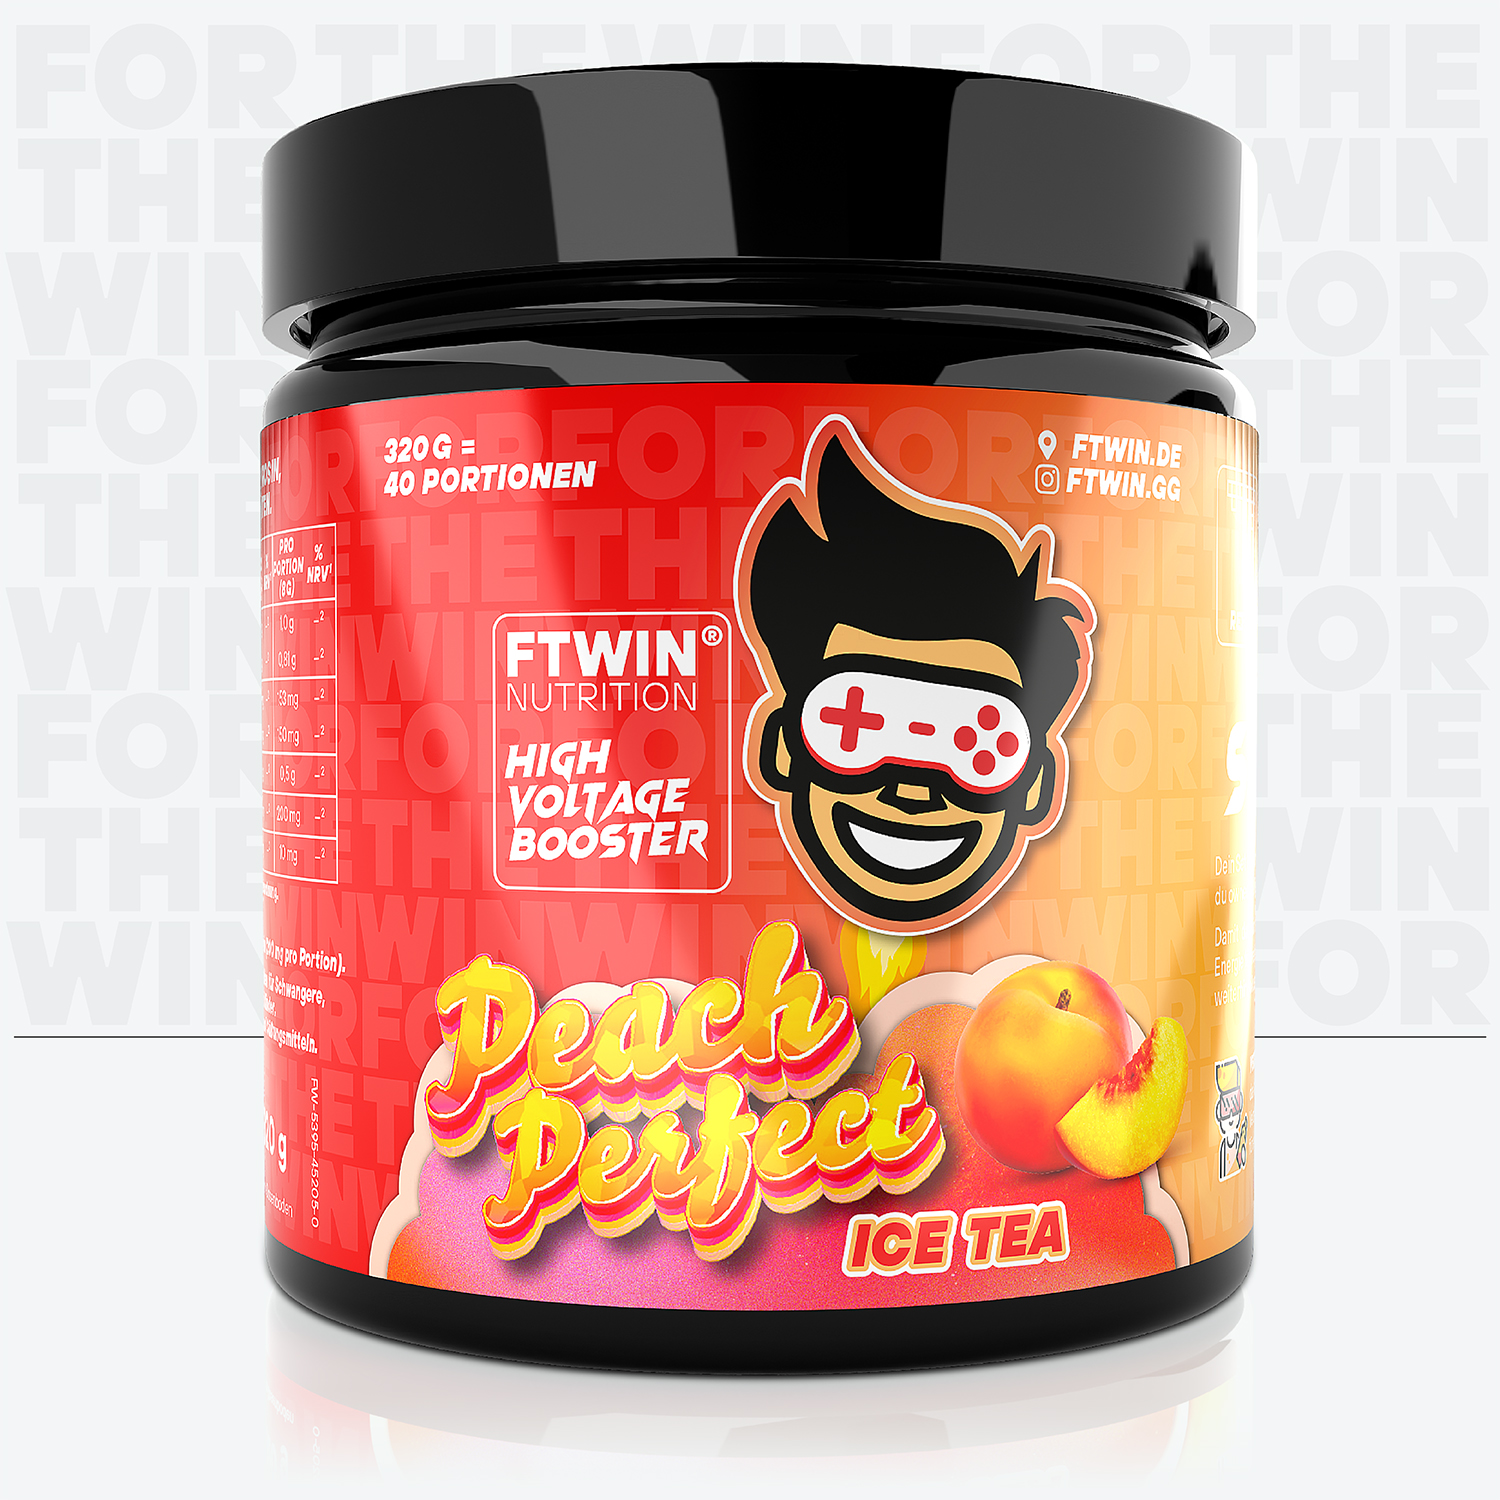 FTWIN High Voltage Gaming Booster – Peach Perfect Flavour